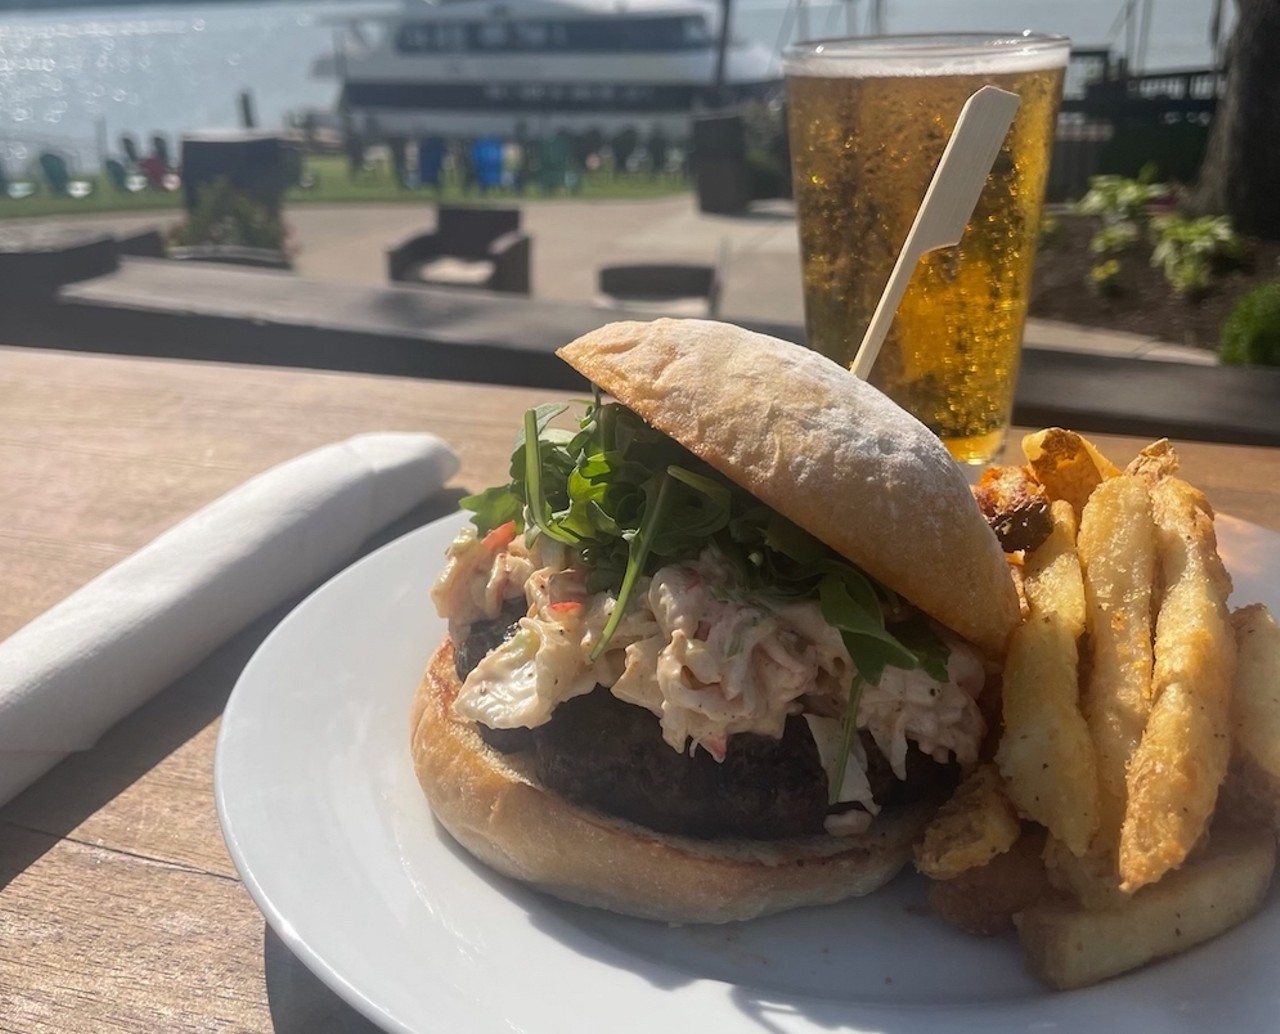 Captain&#146;s Quarters
The Crabby Crawler
An 8 oz Wagyu burger grilled to perfection and topped with crab salad, arugula, and served on a cornmeal kaiser roll.